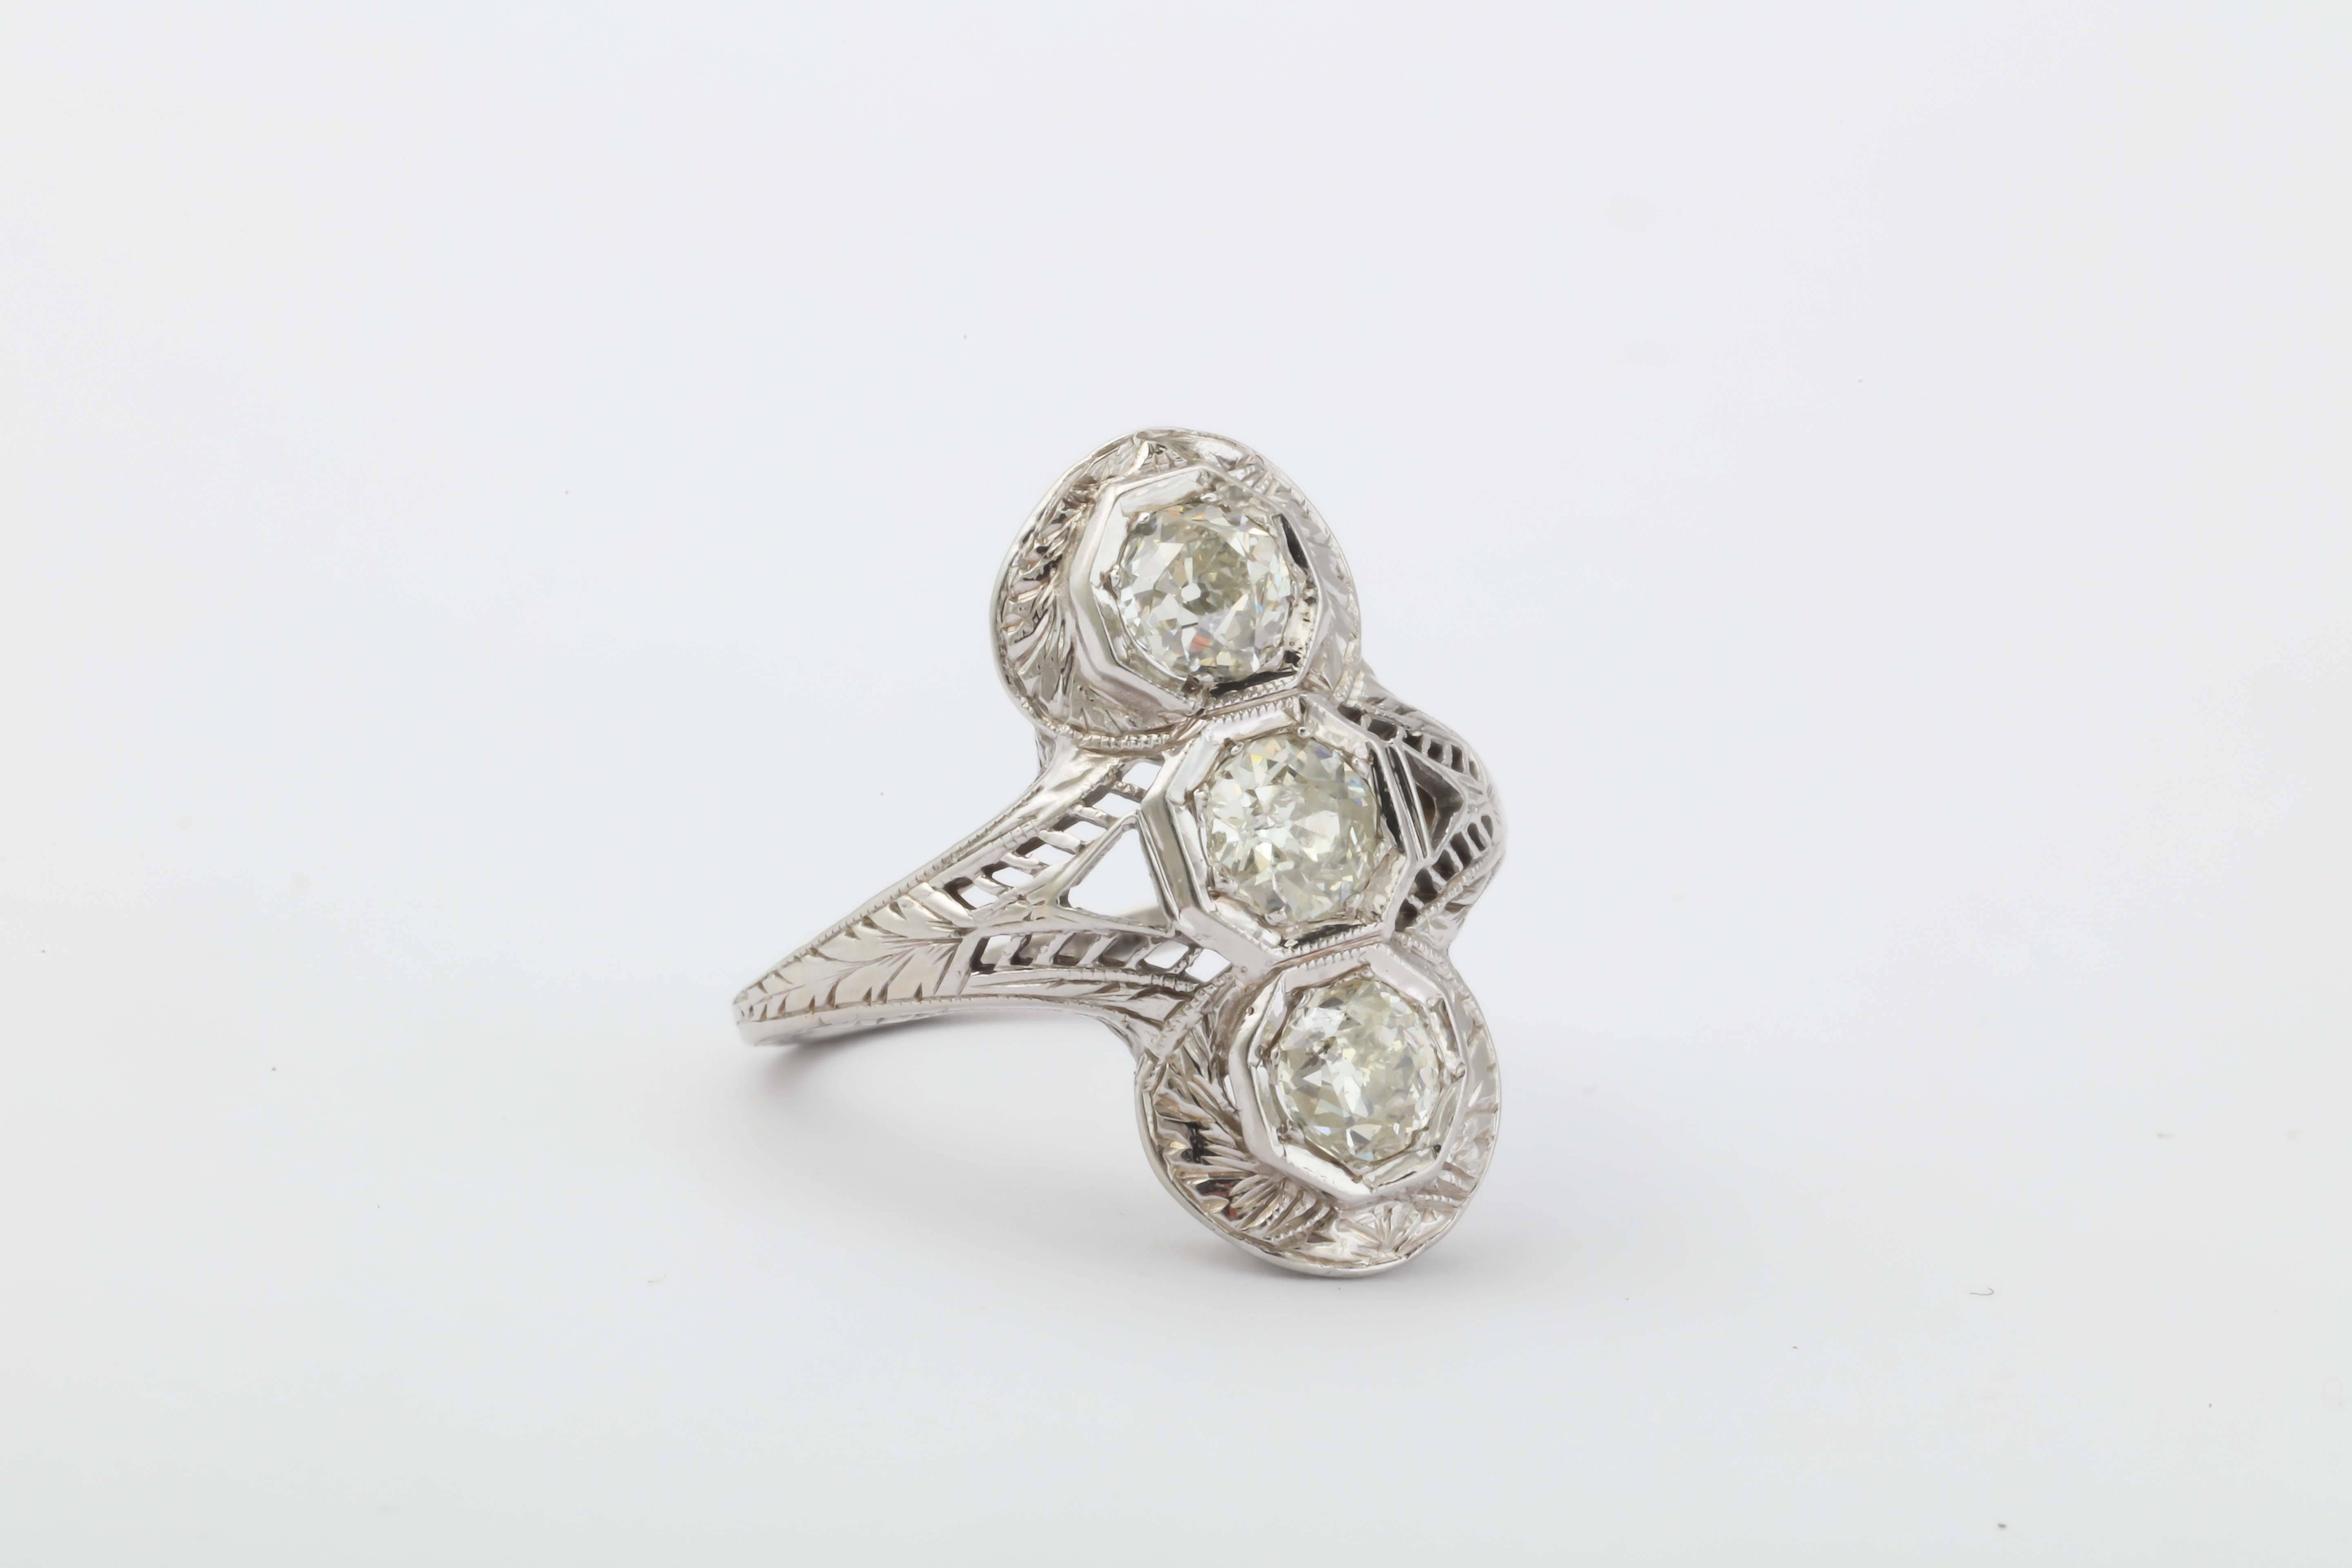 18kt White Gold Filigree Ring - Ca 1910 set with three full cut clean & white Diamonds.  Very lovely. Total weight of Diamonds - approximately 1.25cts.

